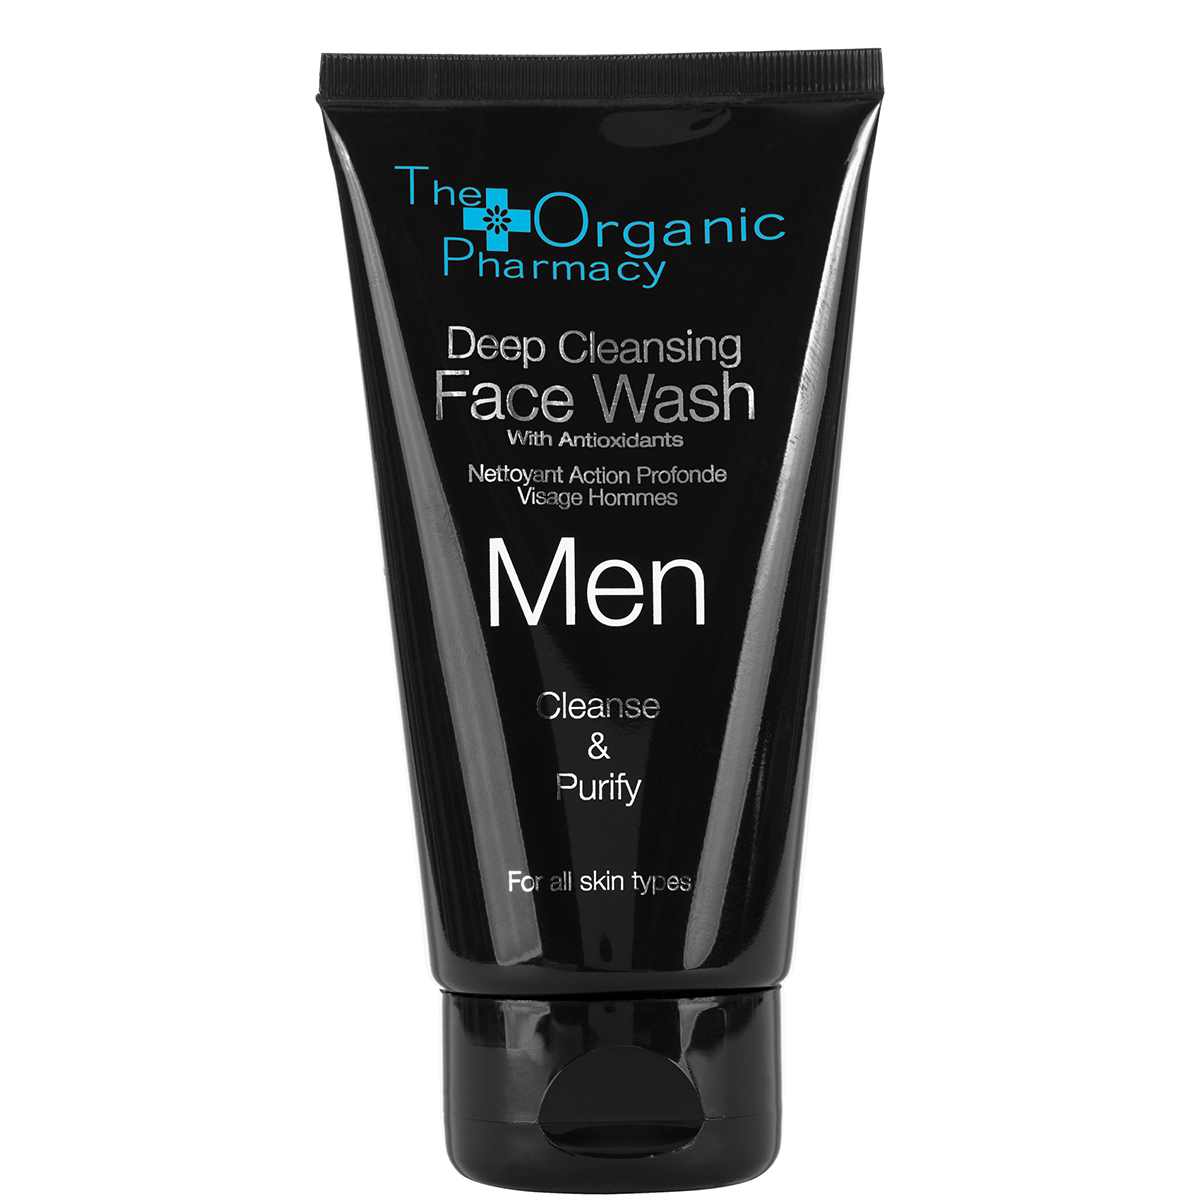 The Organic Pharmacy Men Deep Cleansing Face Wash